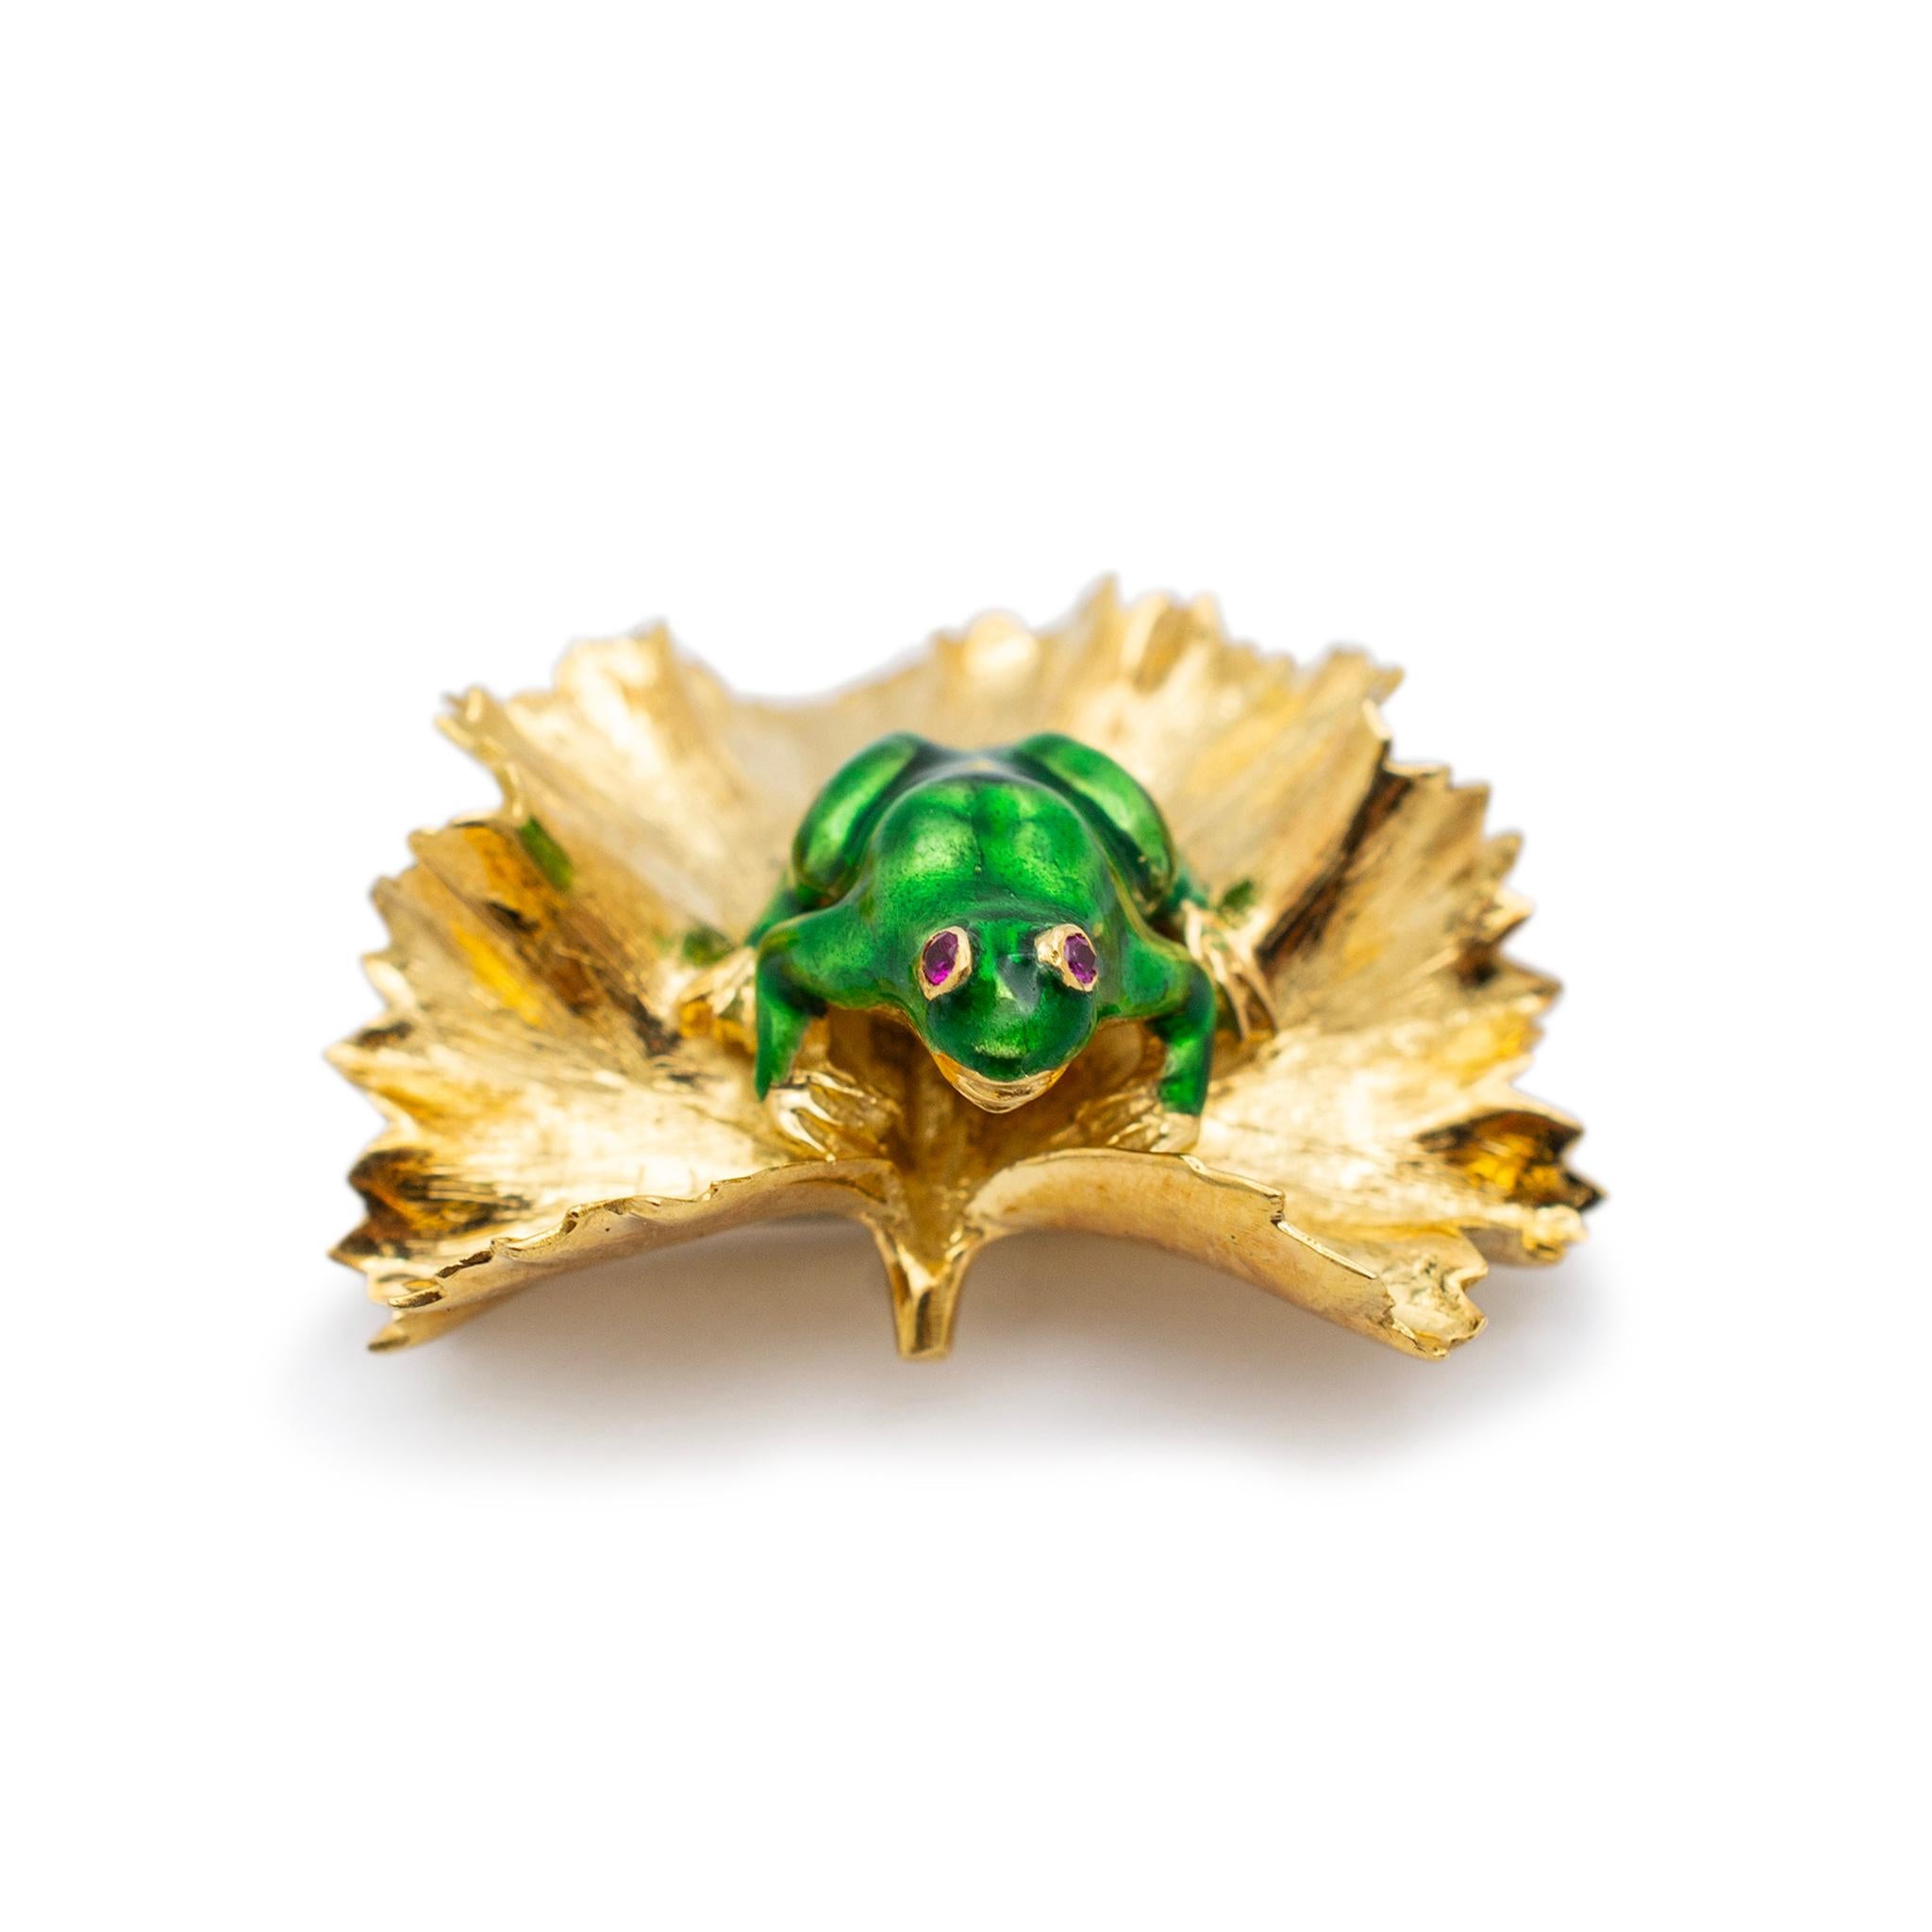 Brand: Kurt Gutmann

Gender: Ladies

Metal Type: 18K Yellow Gold

Length: 1.00 inches

Width: 30.50 mm

Height: 14.75 mm

Weight: 9.51 grams

Lady's designer made 18K yellow gold animal, ruby vintage brooch. The metal was tested and determined to be